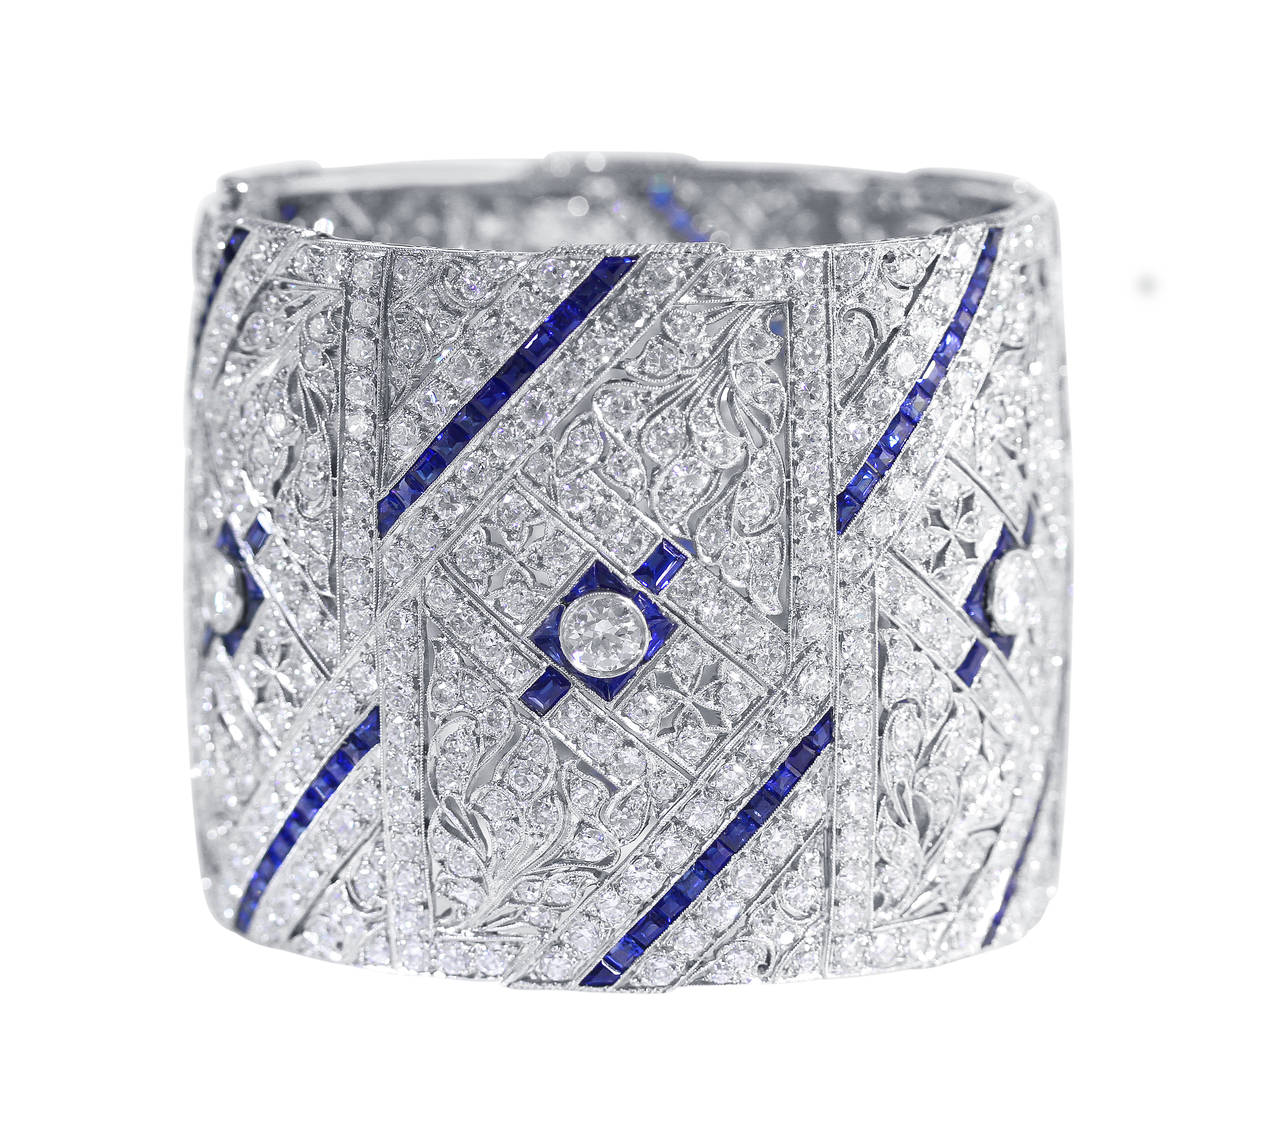 A stunning Art Deco platinum, diamond and sapphire bangle bracelet, the wide bangle of openwork floral and geometric design set in the center with an old European-cut diamond weighing approximately 1.50 carats, further set with 5 old European-cut